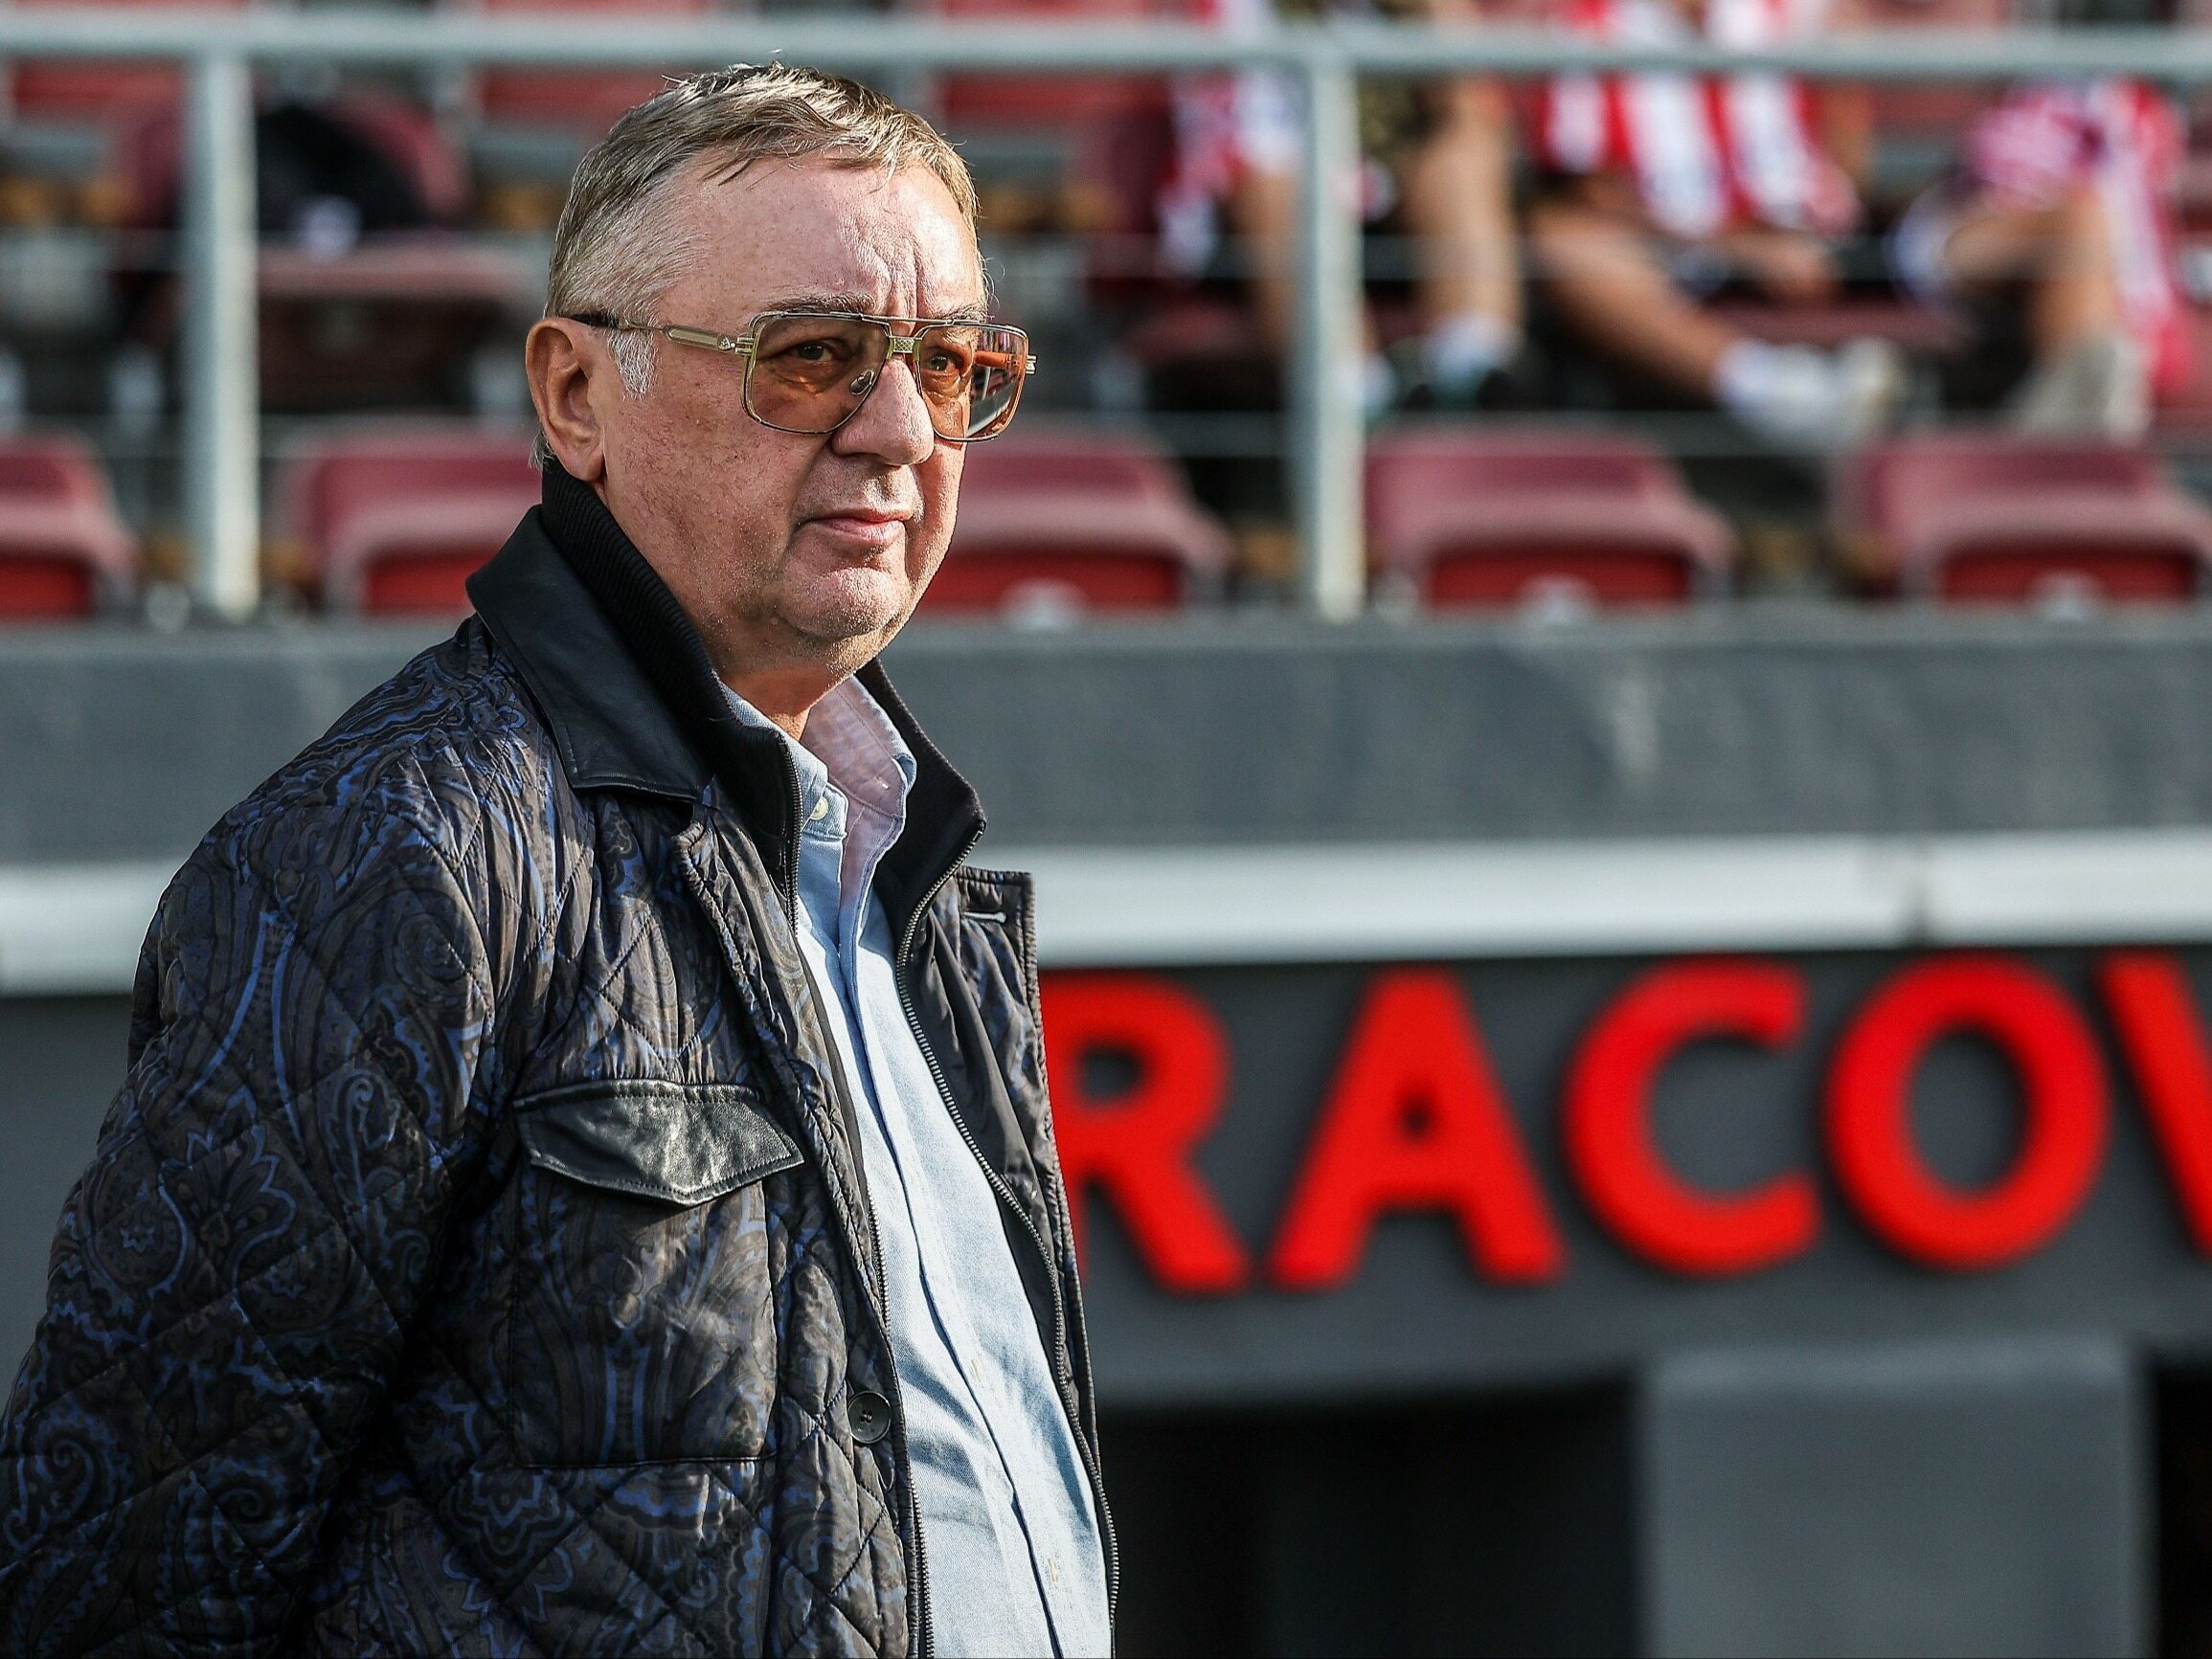 Disturbing news about the president of Cracovia.  He was supposed to go to hospital